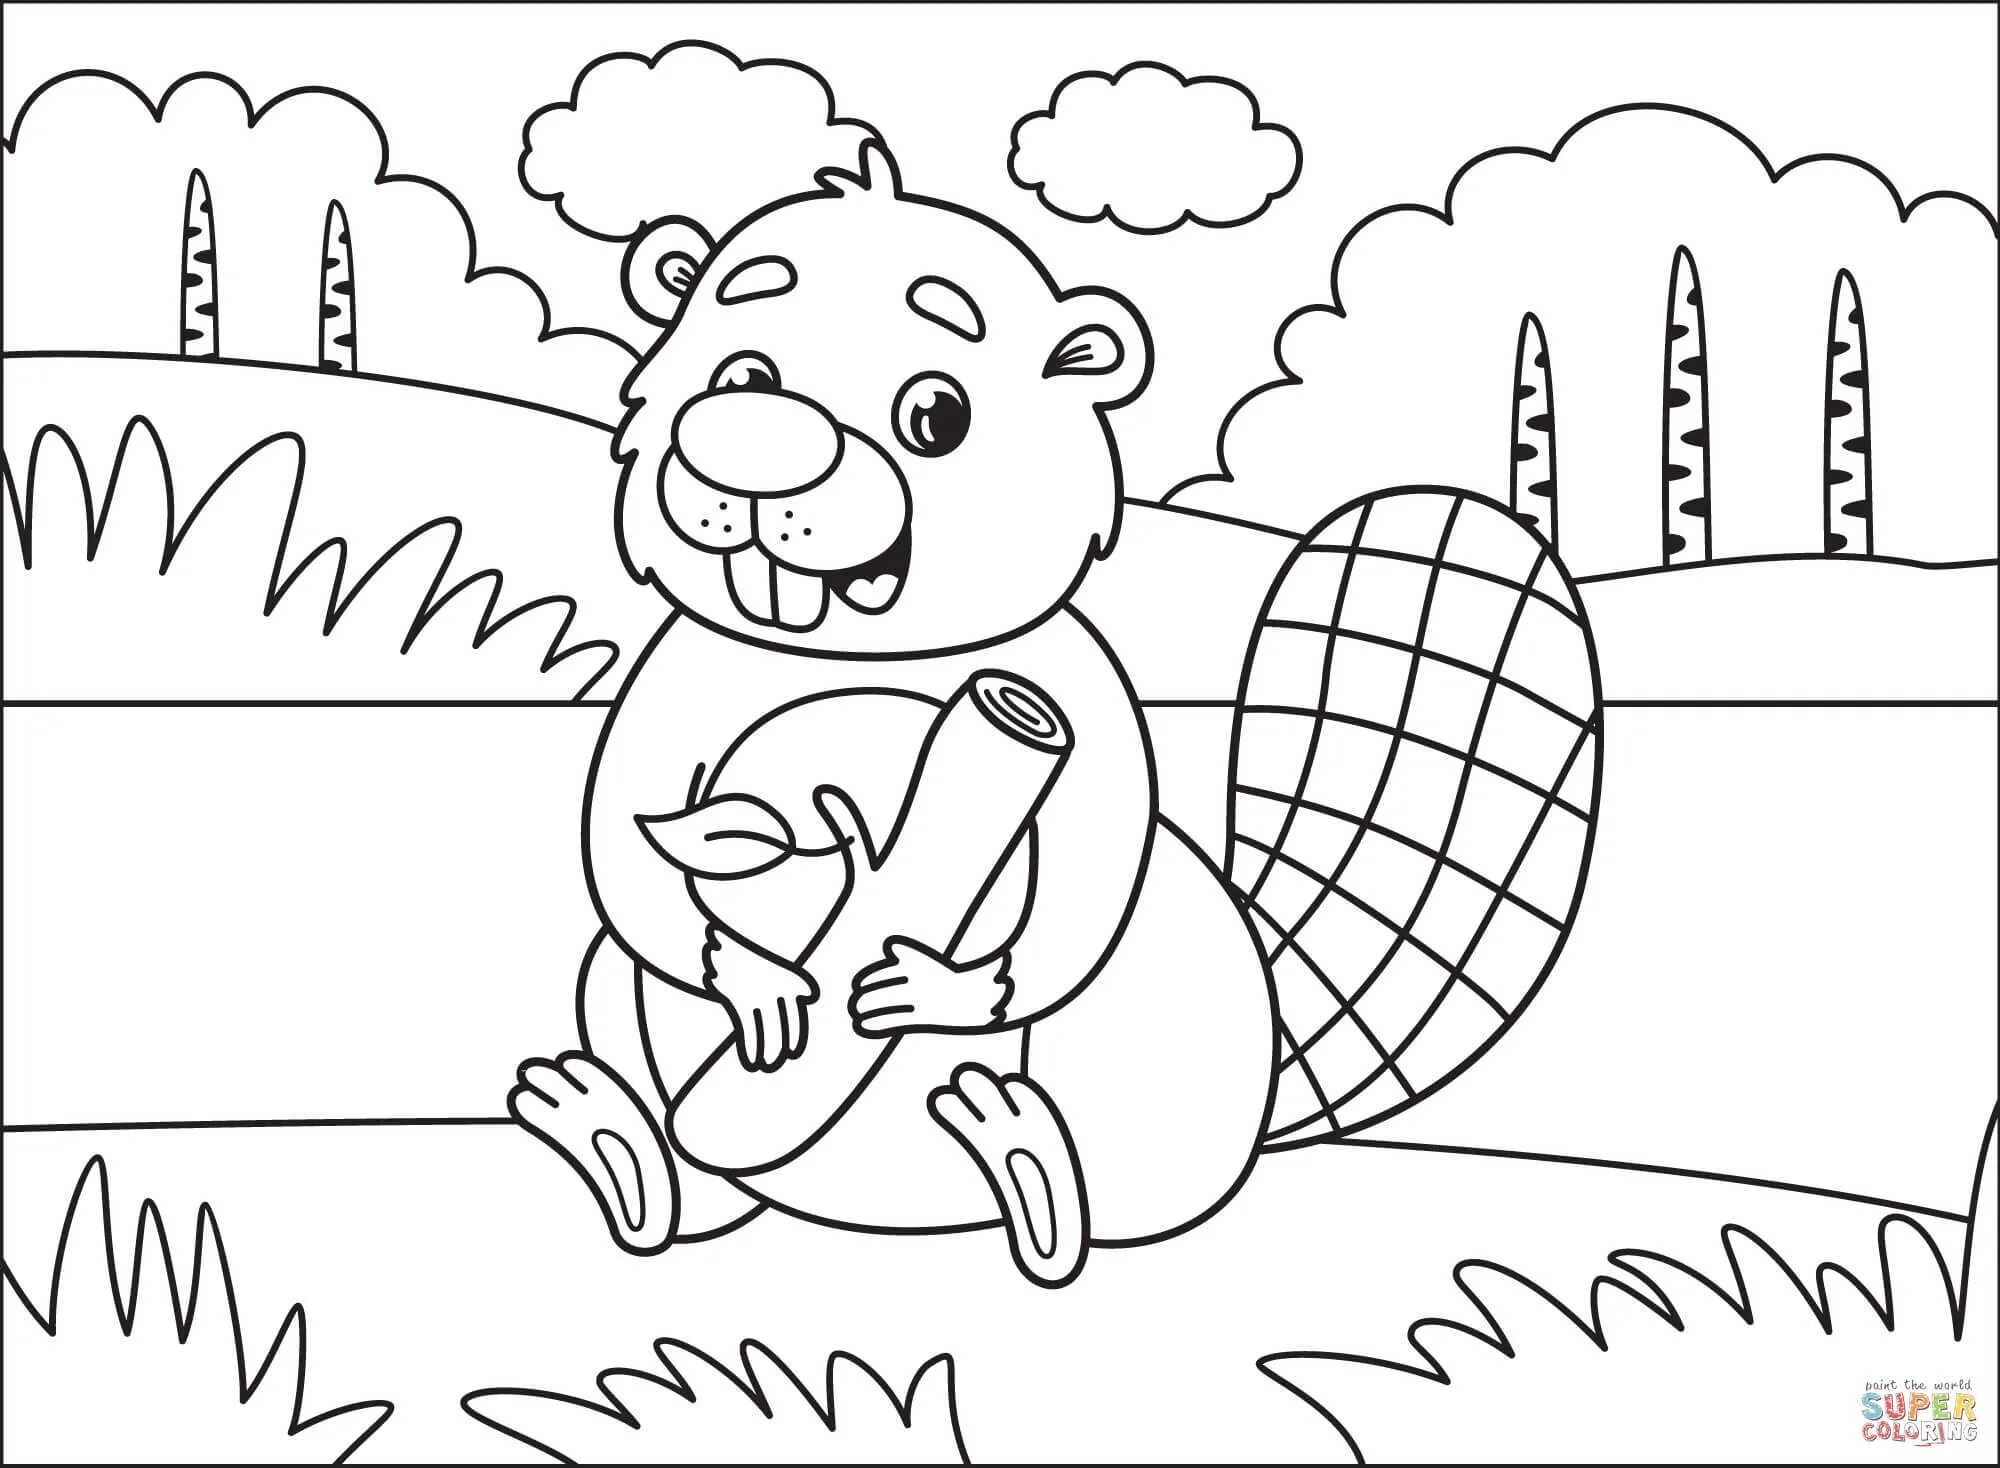 Fabulous beaver coloring page